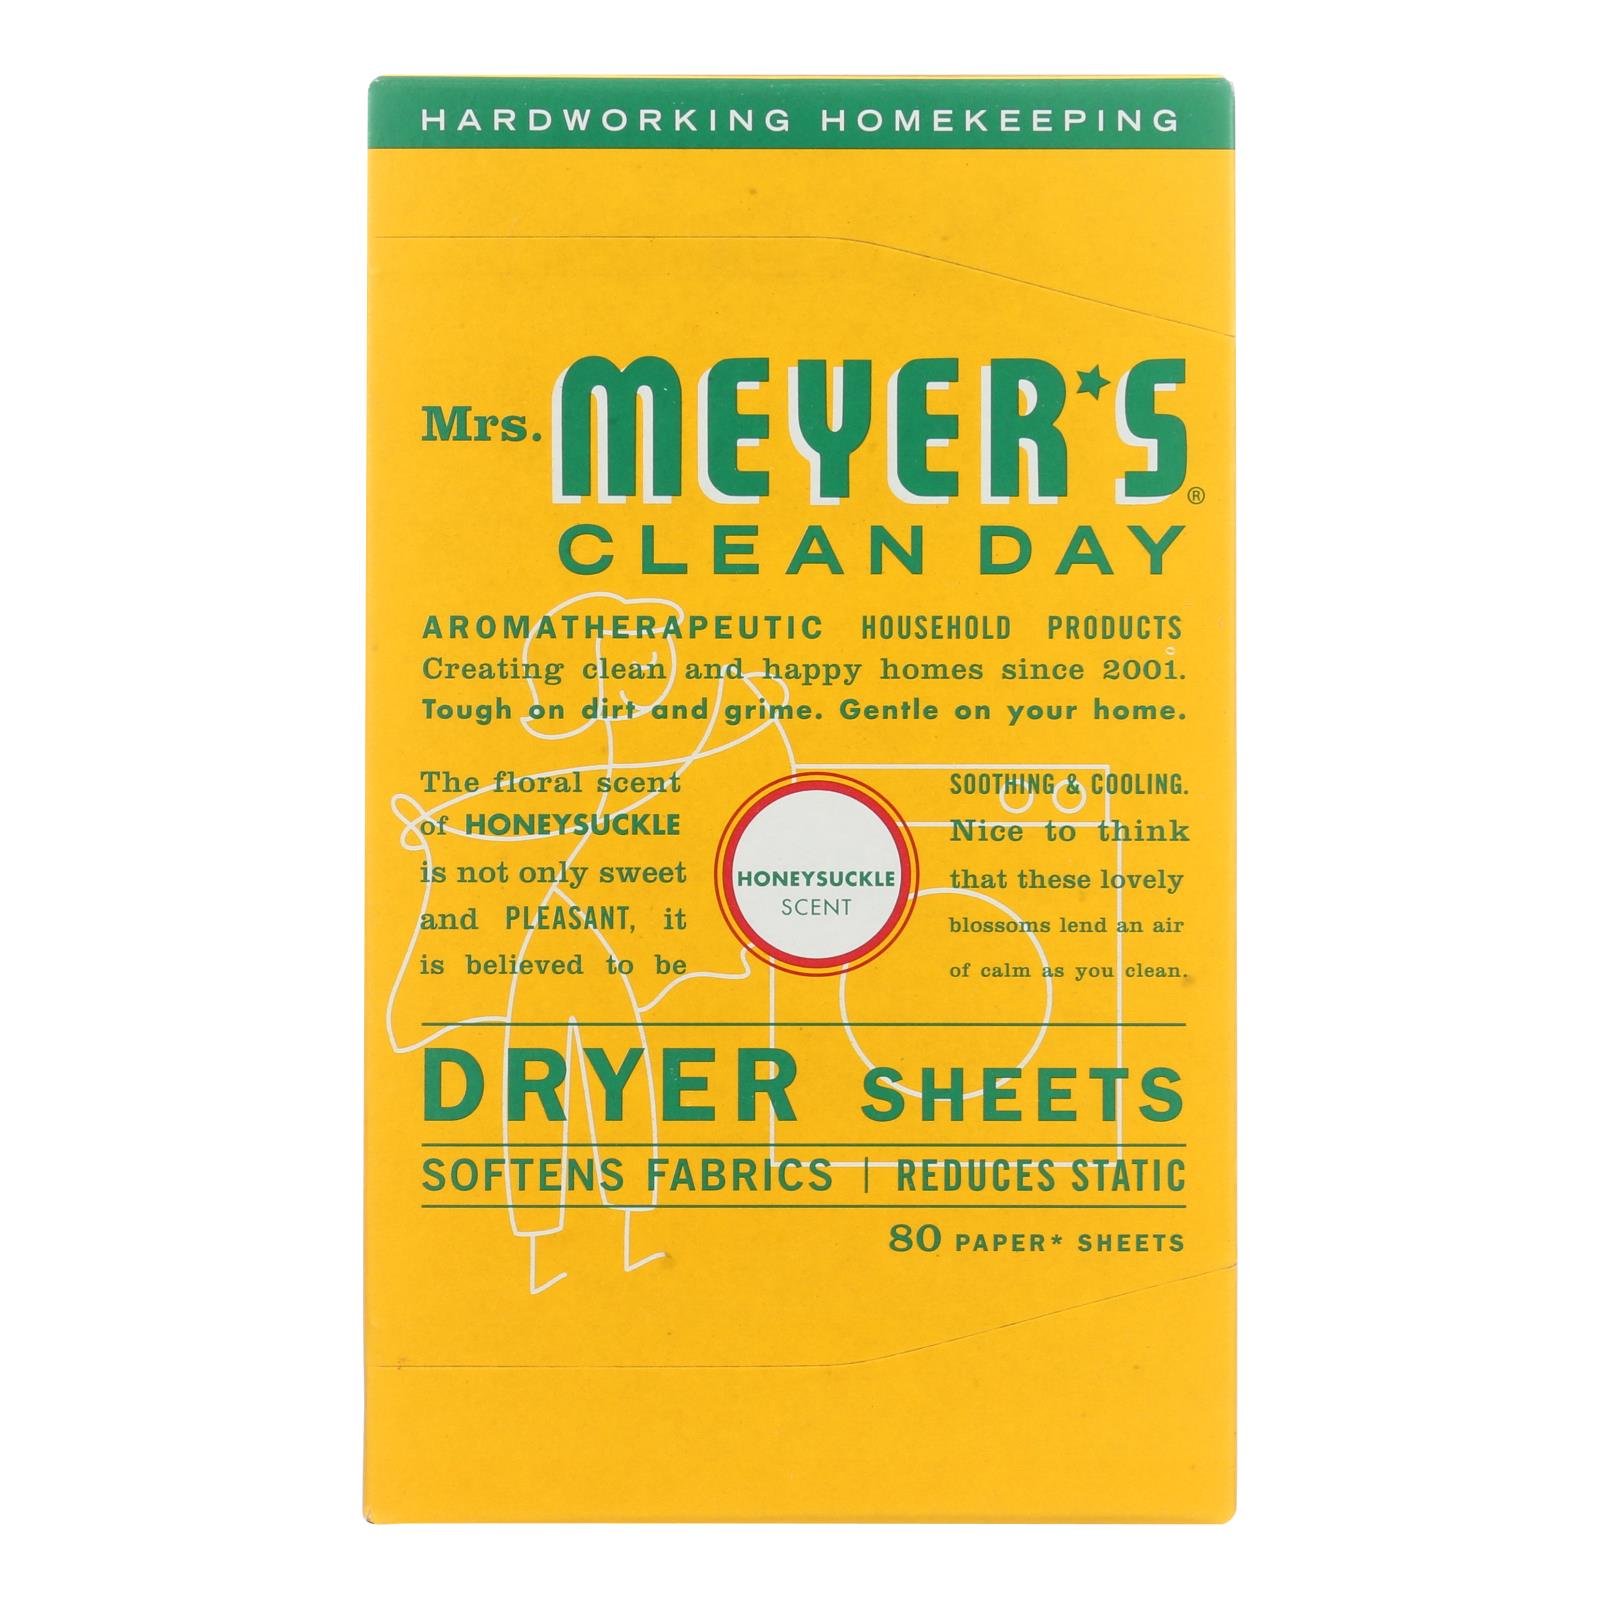 Mrs. Meyer's Clean Day - Dryer Sheets - Honeysuckle - 12개 묶음상품 - 80 sheets